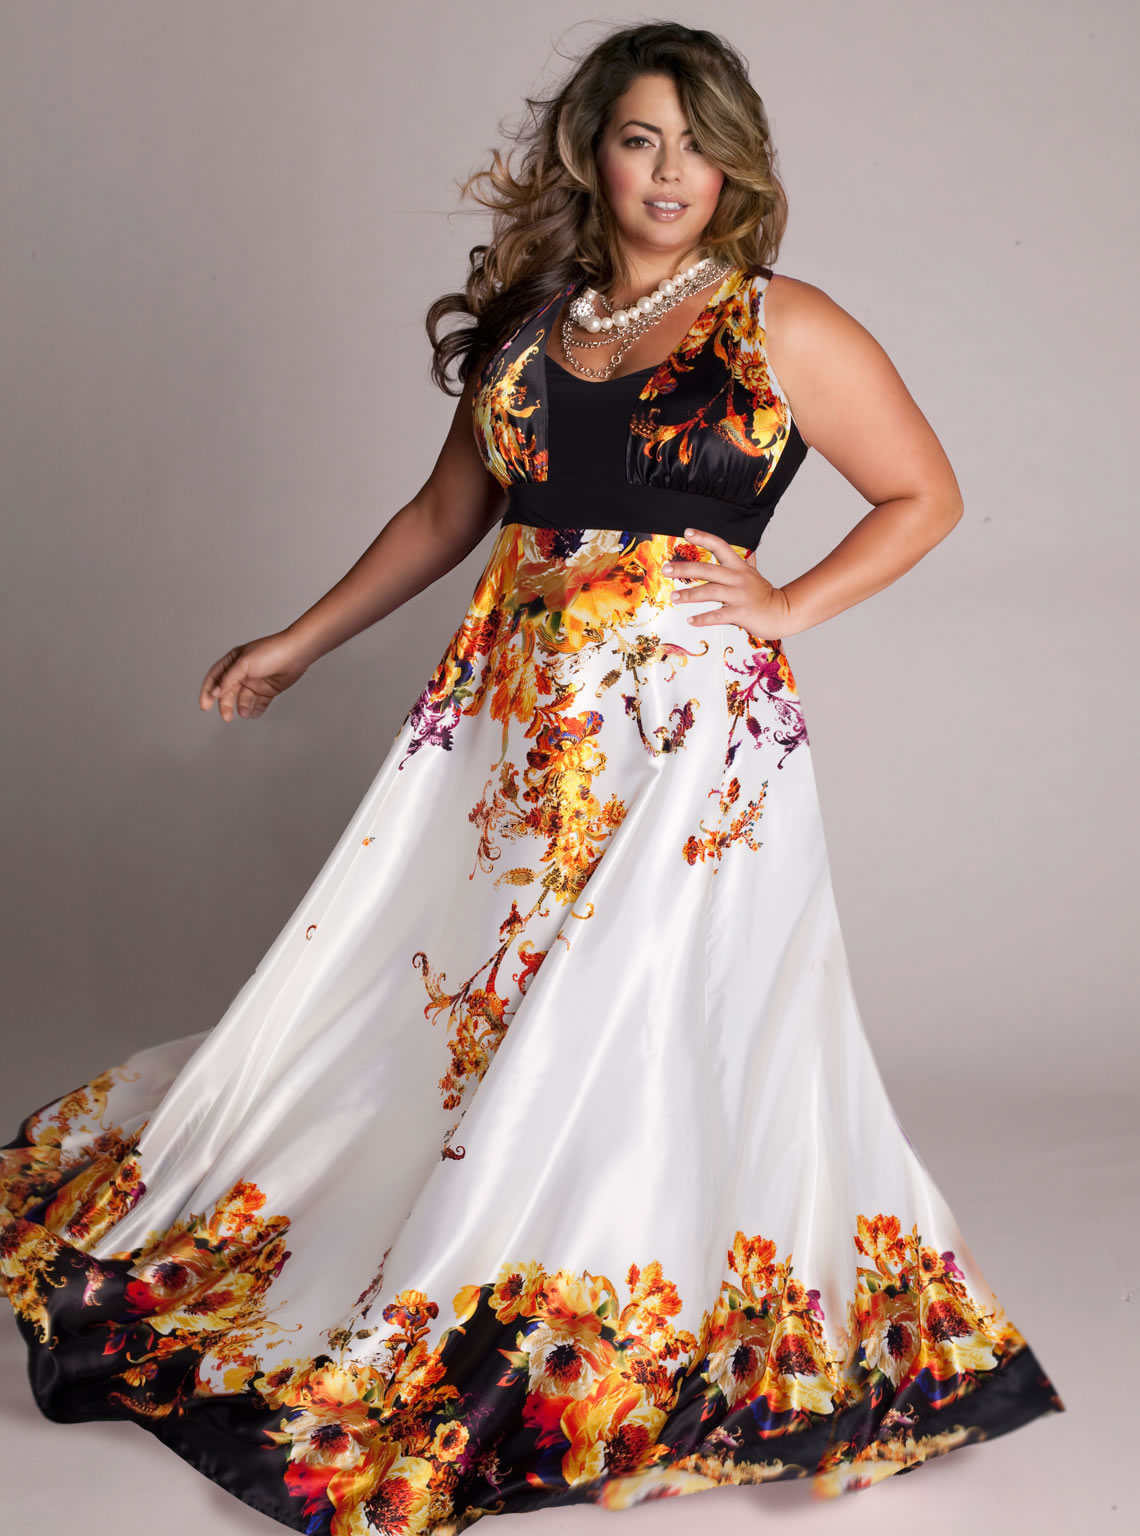 25 Plus Size Womens Clothing For Summer